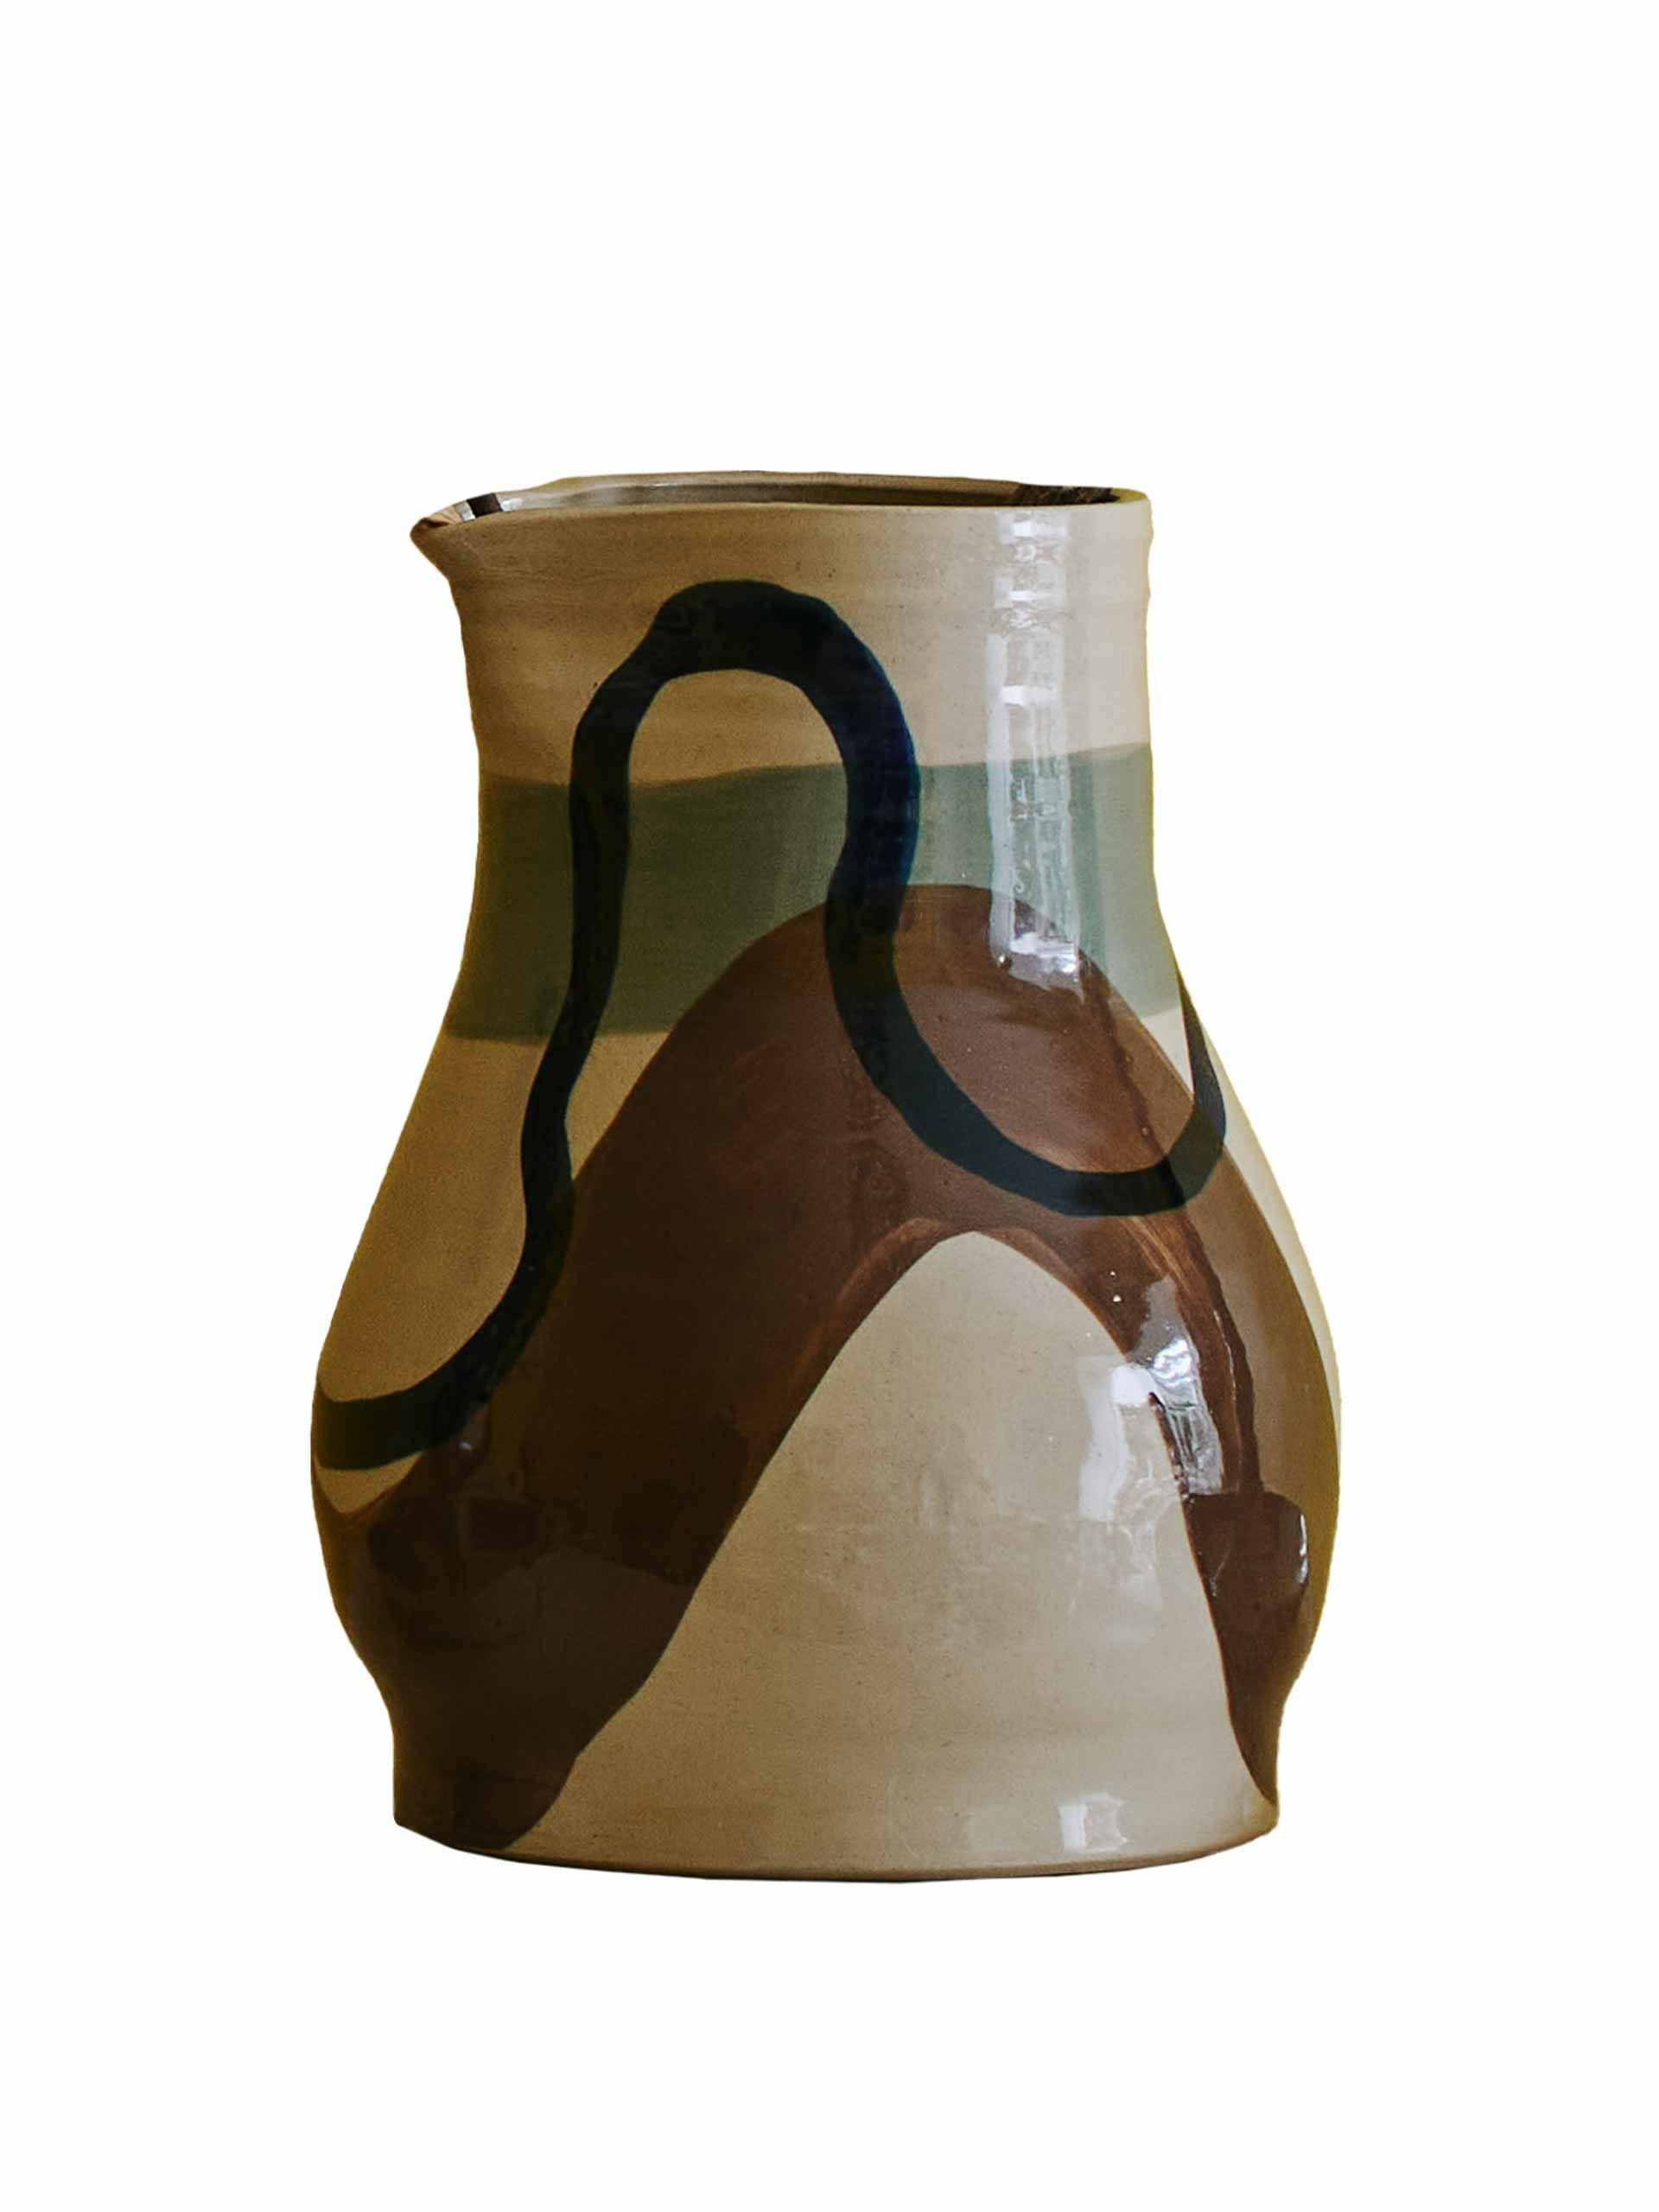 Collagerie x K.S Creative Pottery jug